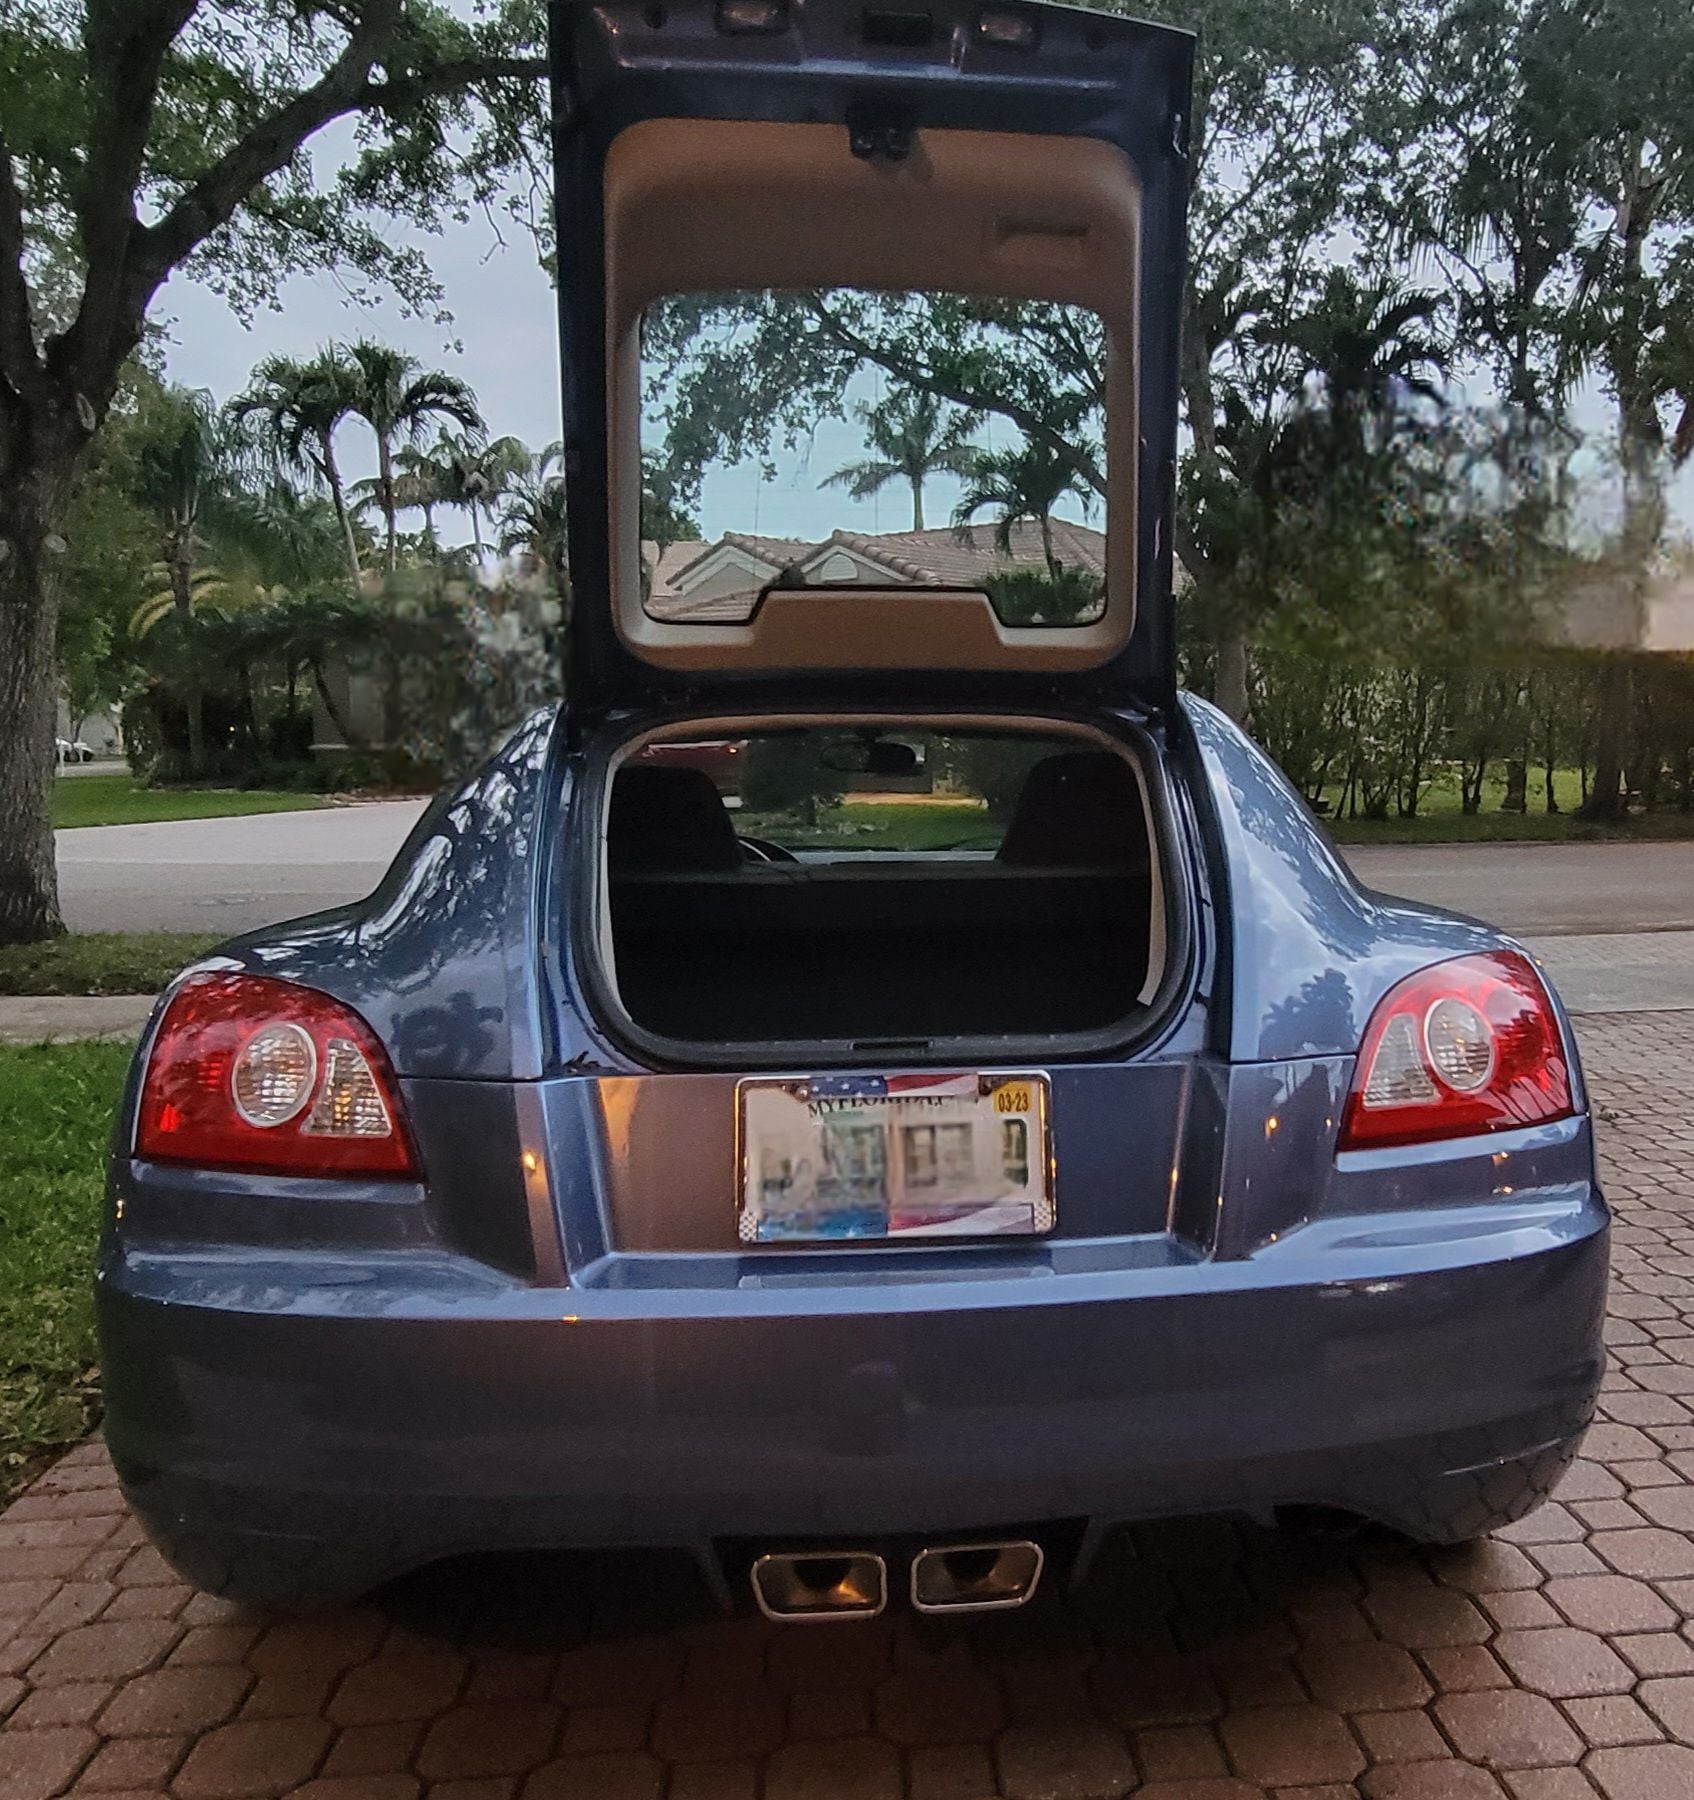 2005 Chrysler Crossfire - 2005 Crossfire LTD - Used - VIN 1C3AN69L55X040521 - 6 cyl - 2WD - Automatic - Coupe - Blue - Coconut Creek, FL 33073, United States